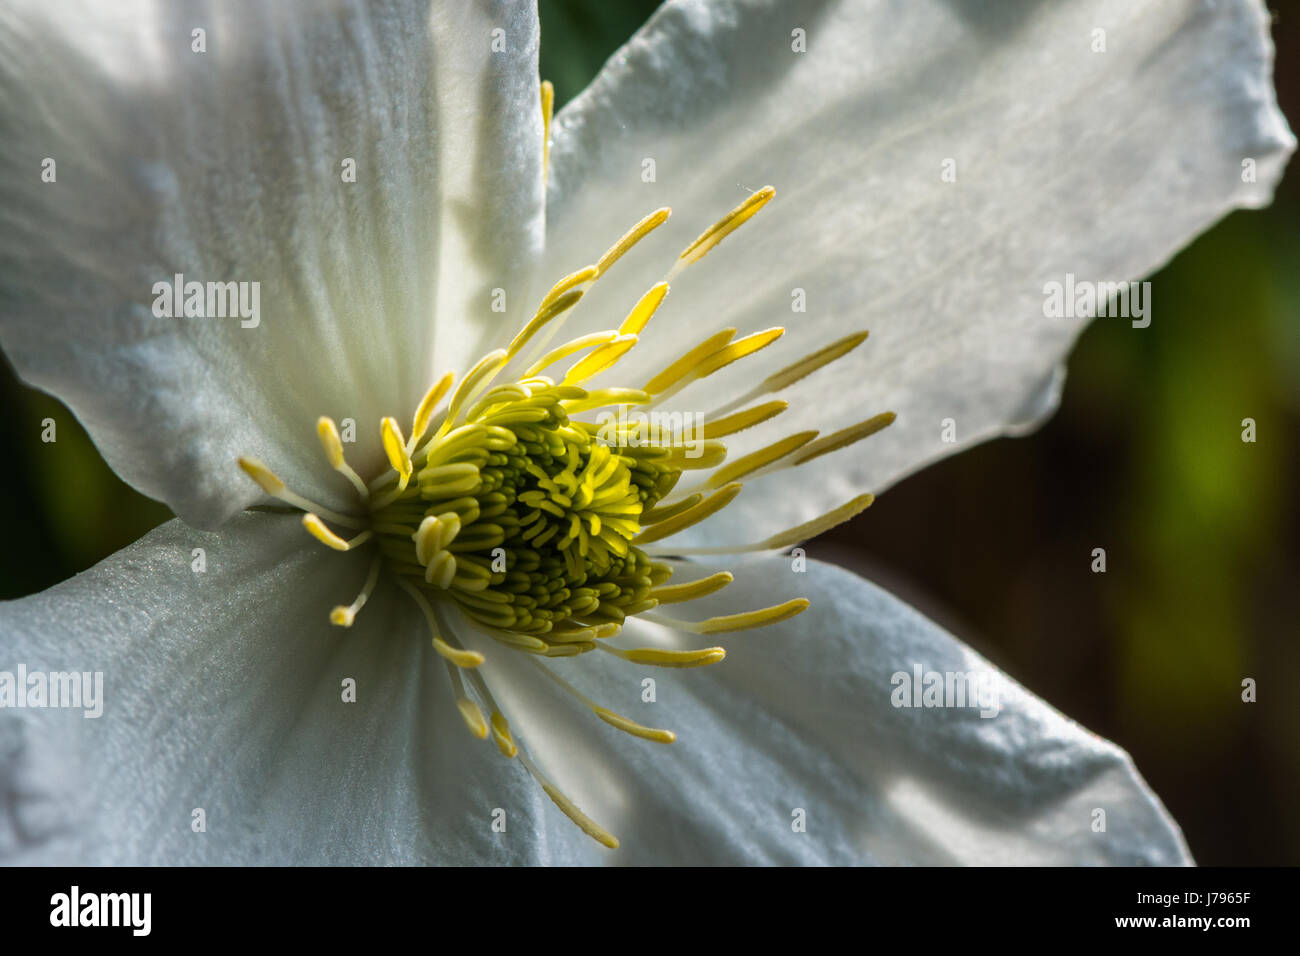 Close-up of white flower of the garden climbing plant, Clematis Montana 'Spooner', in sunlight showing petals and stamen Sunday 21st May 2017 Stock Photo